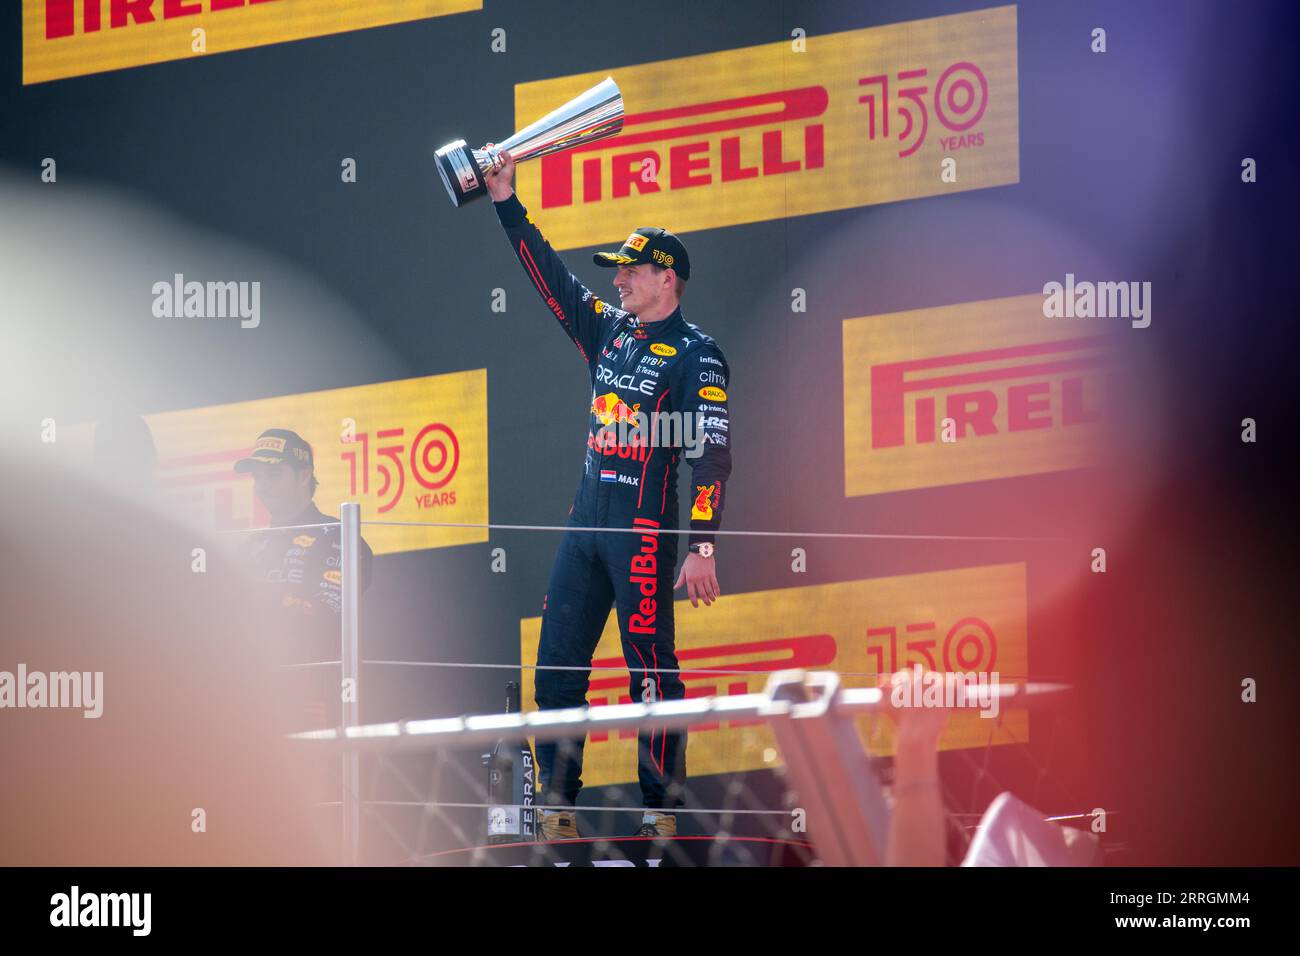 This image immortalizes the moment Max Verstappen lifts his trophy on the podium after a first-place finish at the Spanish Grand Prix. Stock Photo